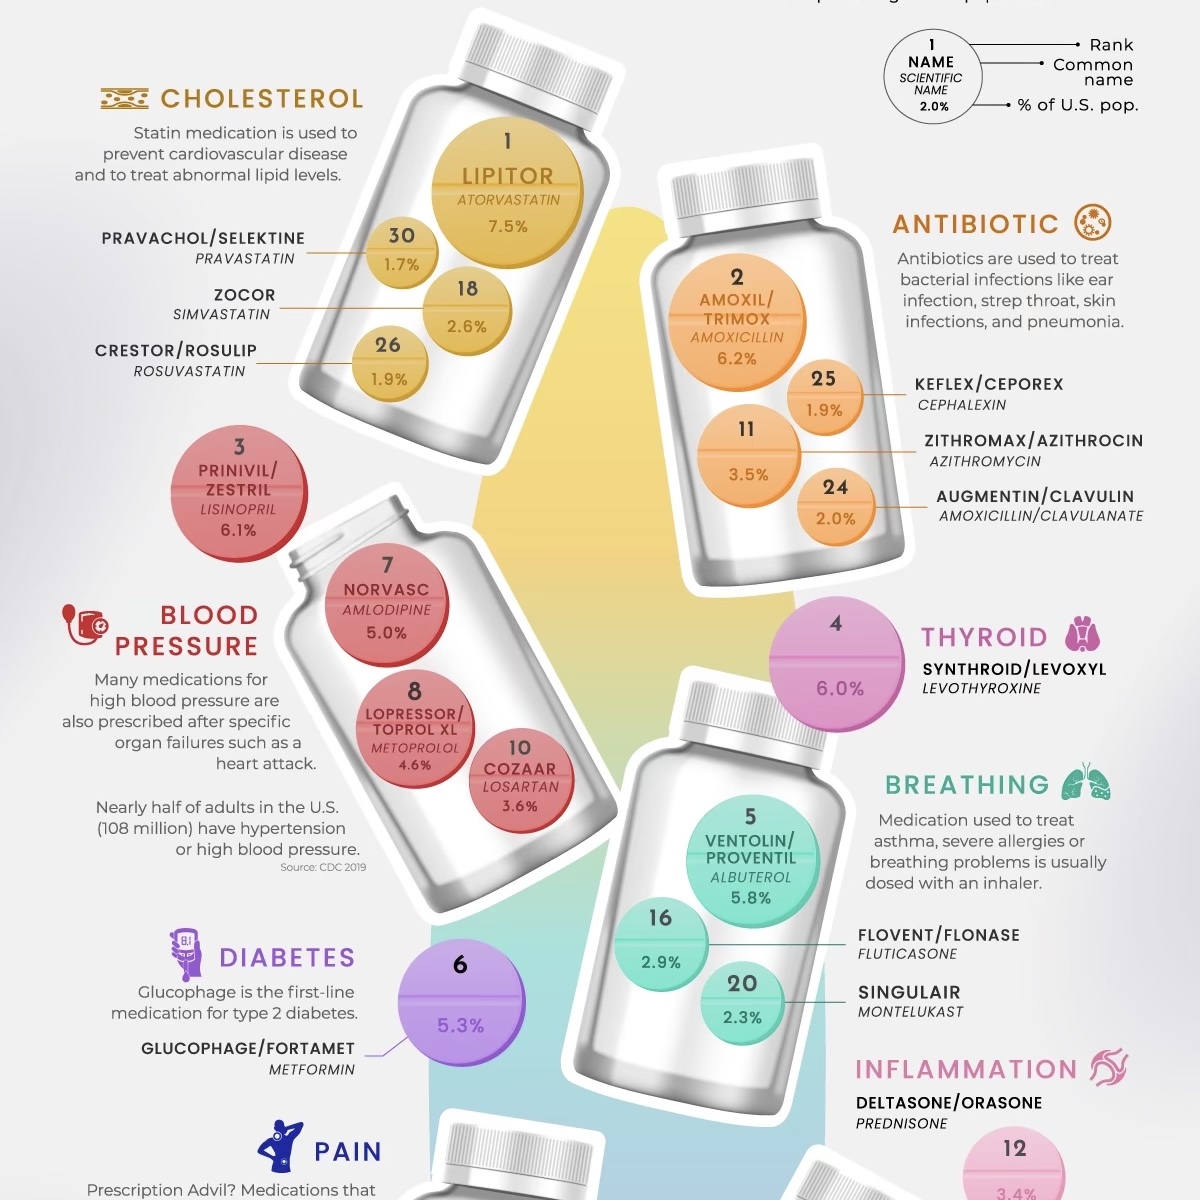 For today's #MedicationMonday, we have a laundry list of the most common medications used in the United States. Swipe to zoom in! Do any of them sound familiar? 

#tuspsyf #templepharmacy #scriptyourfuture #medadherence